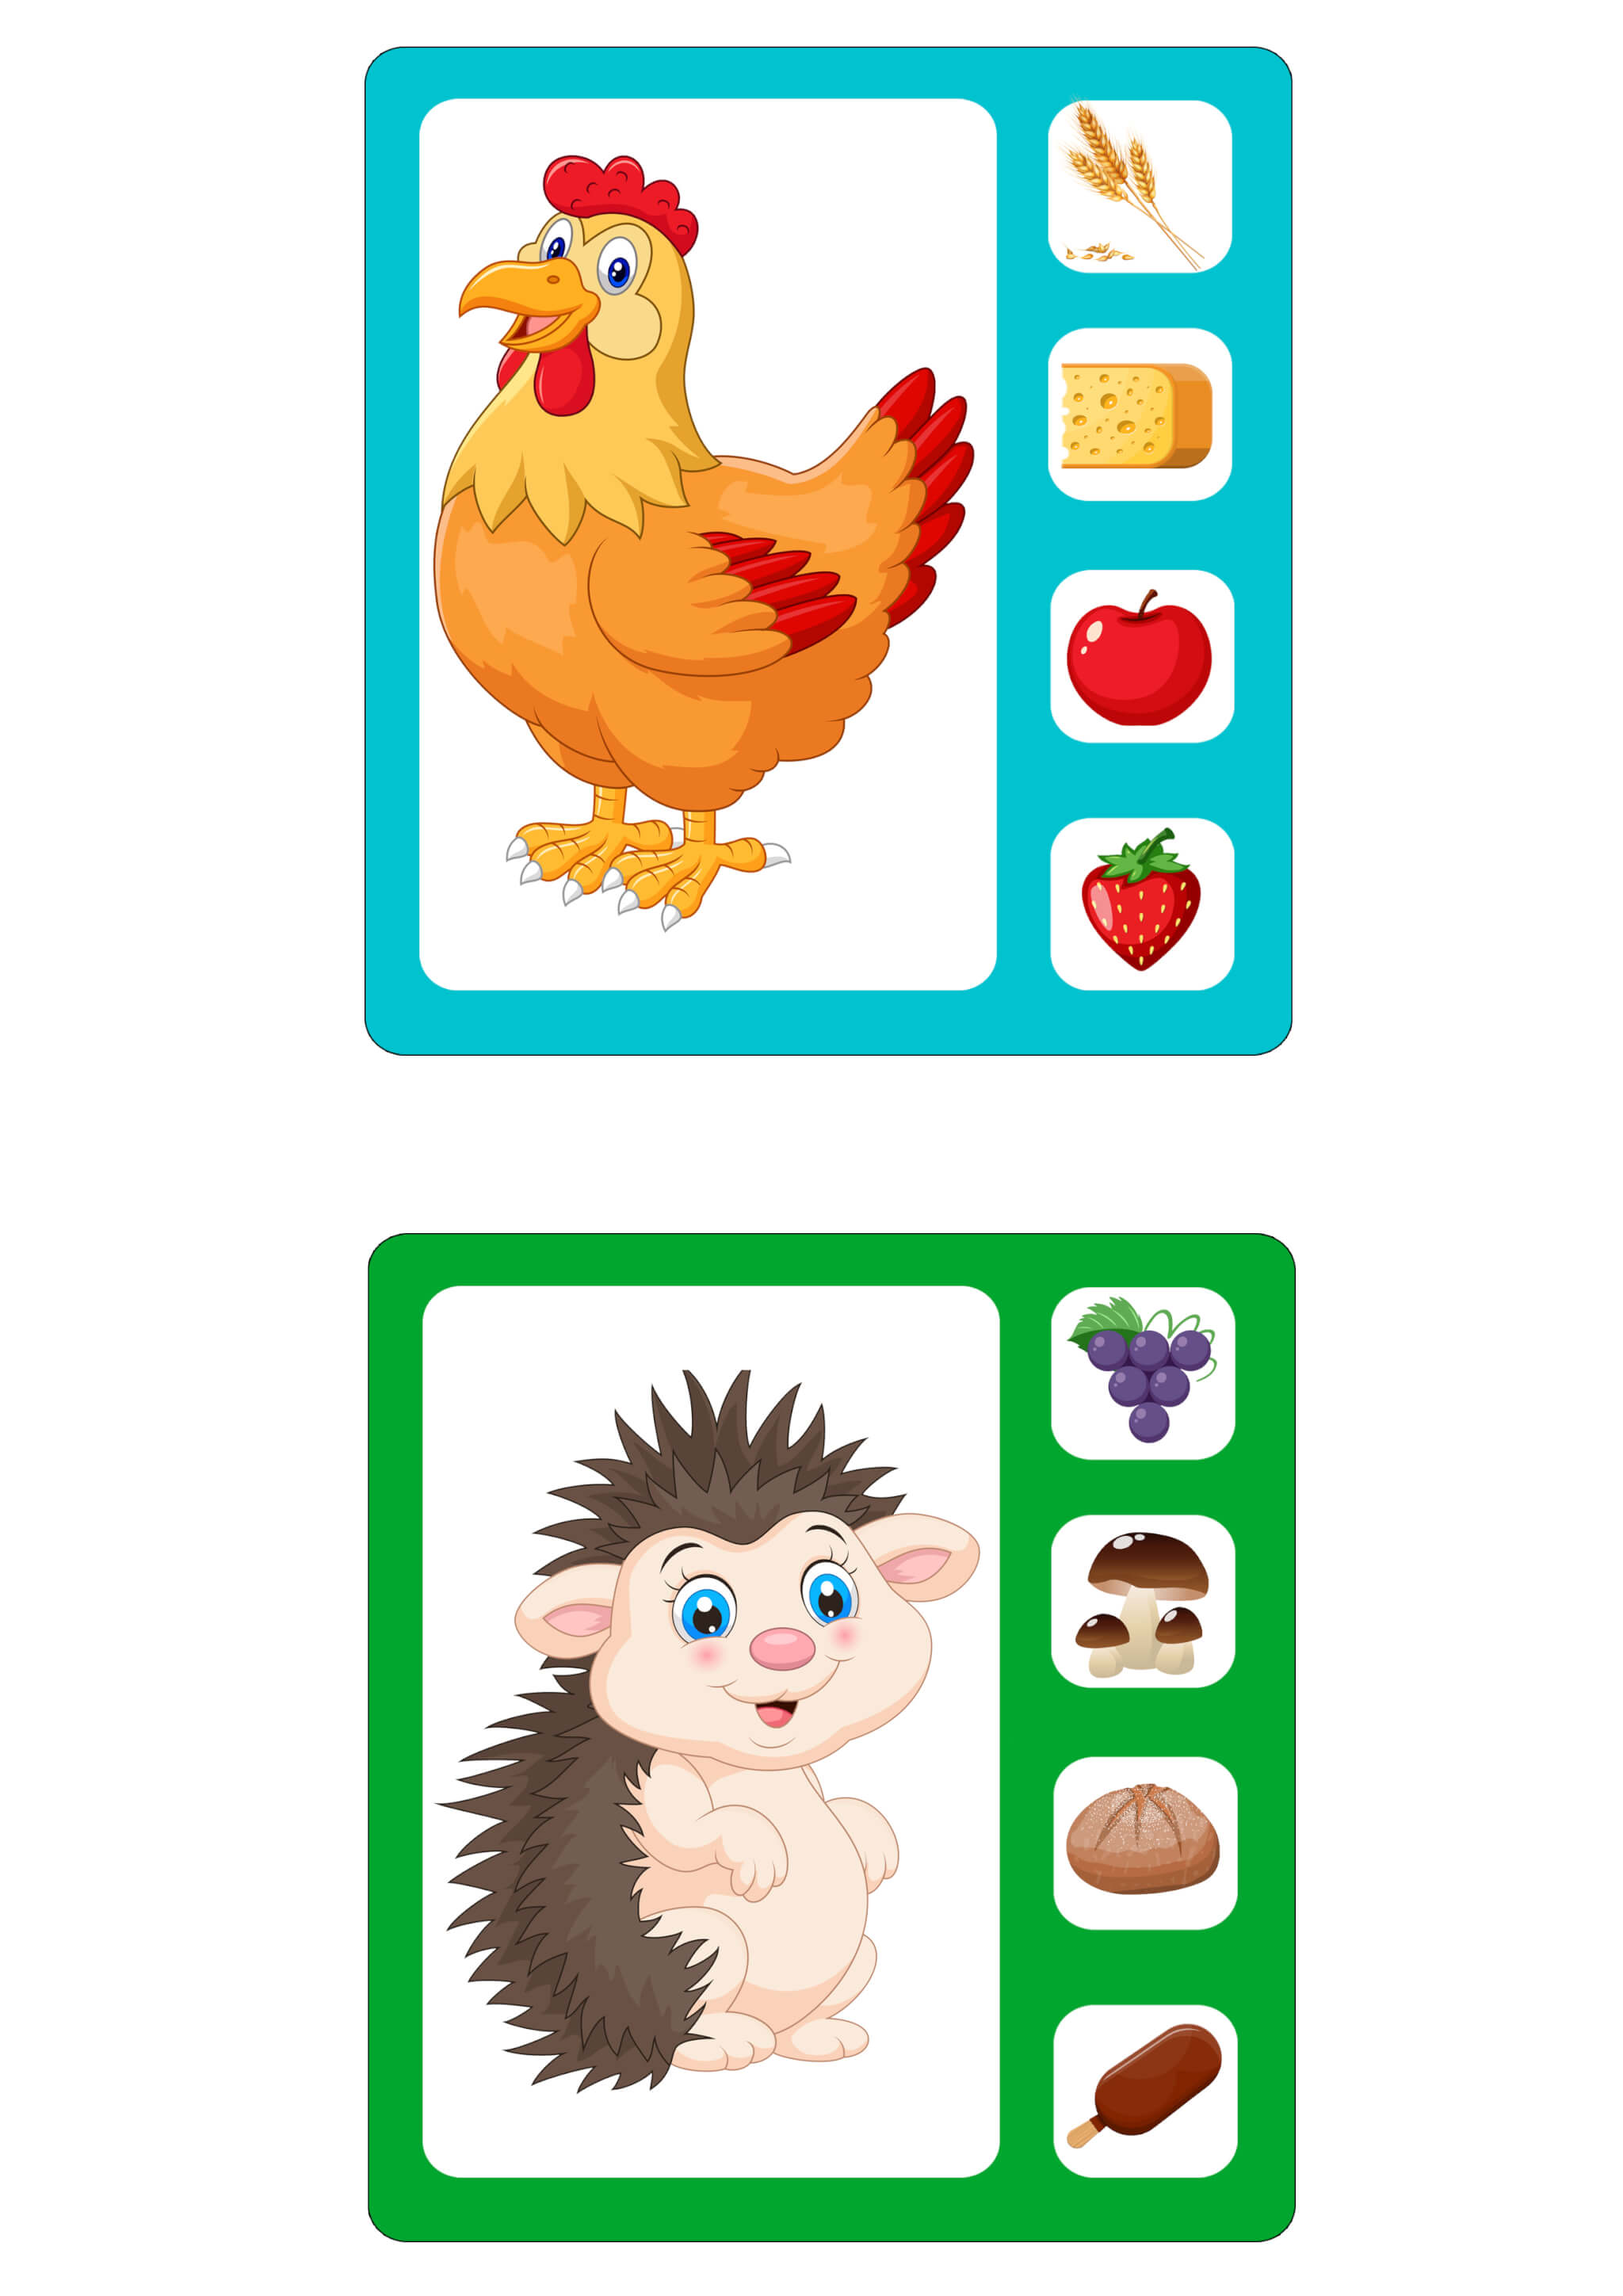 Worksheet Animals and Their Food - Image 4